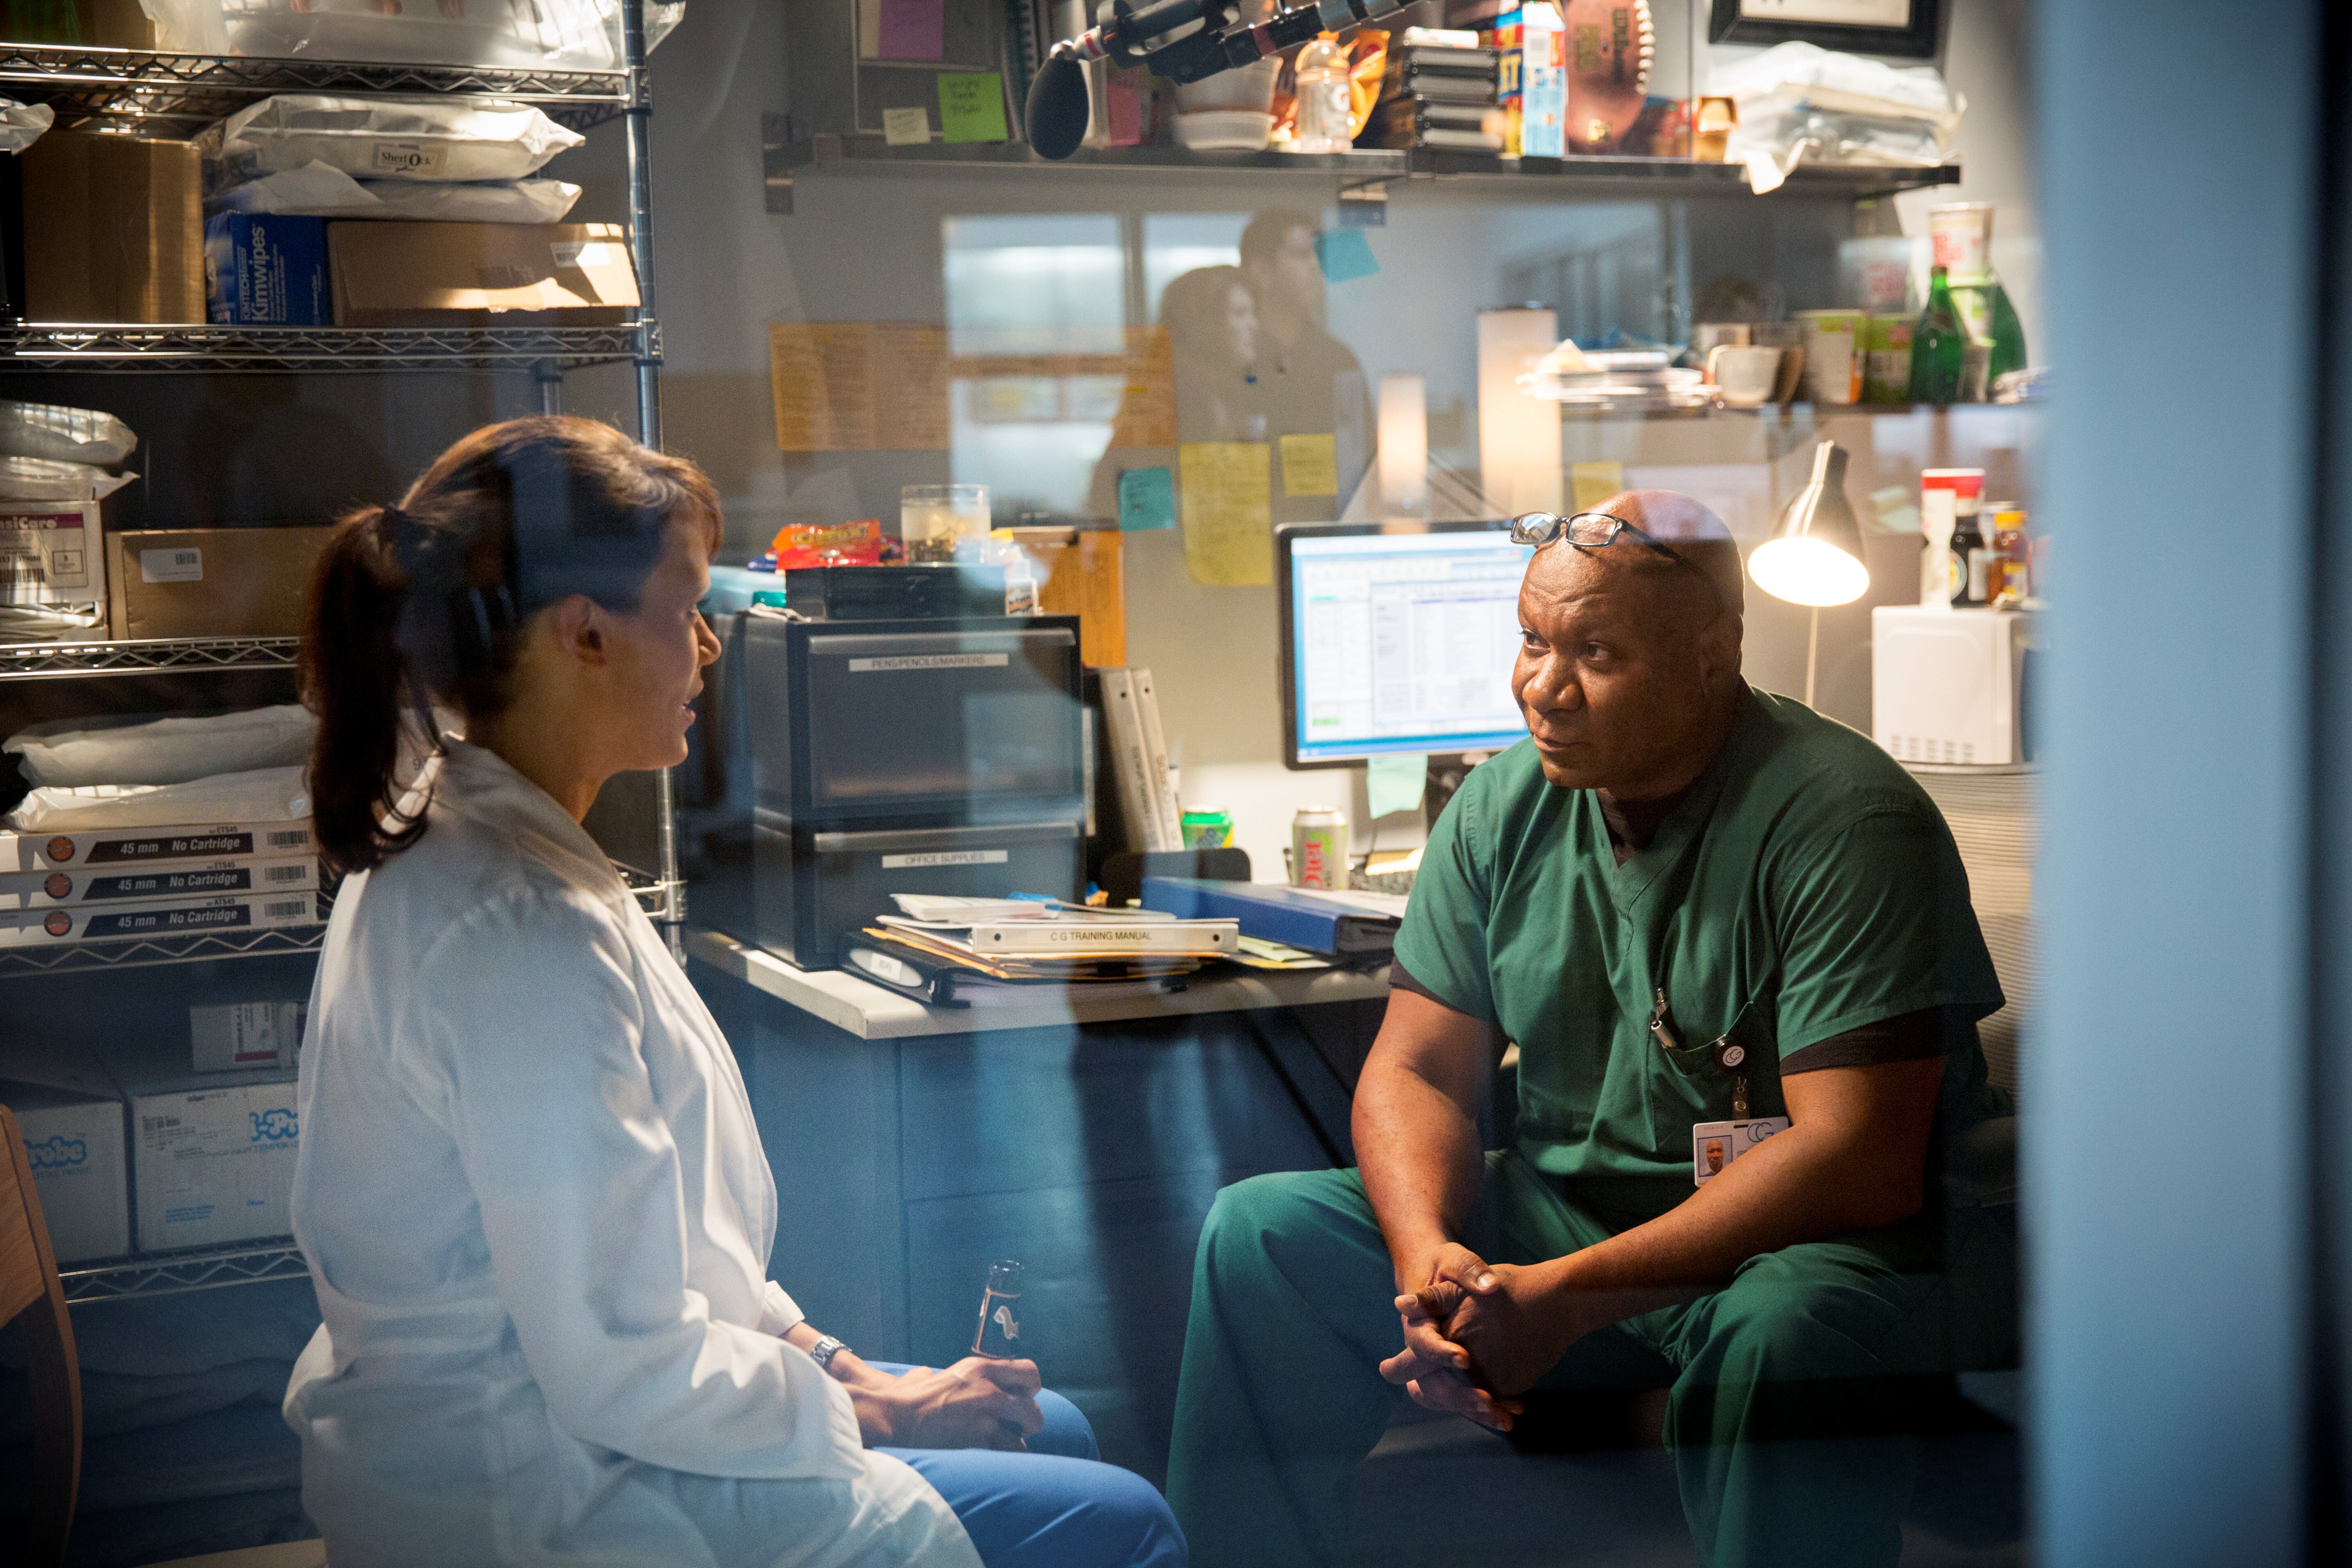 Emily Swallow and Ving Rhames on TNT's MONDAY MORNINGS